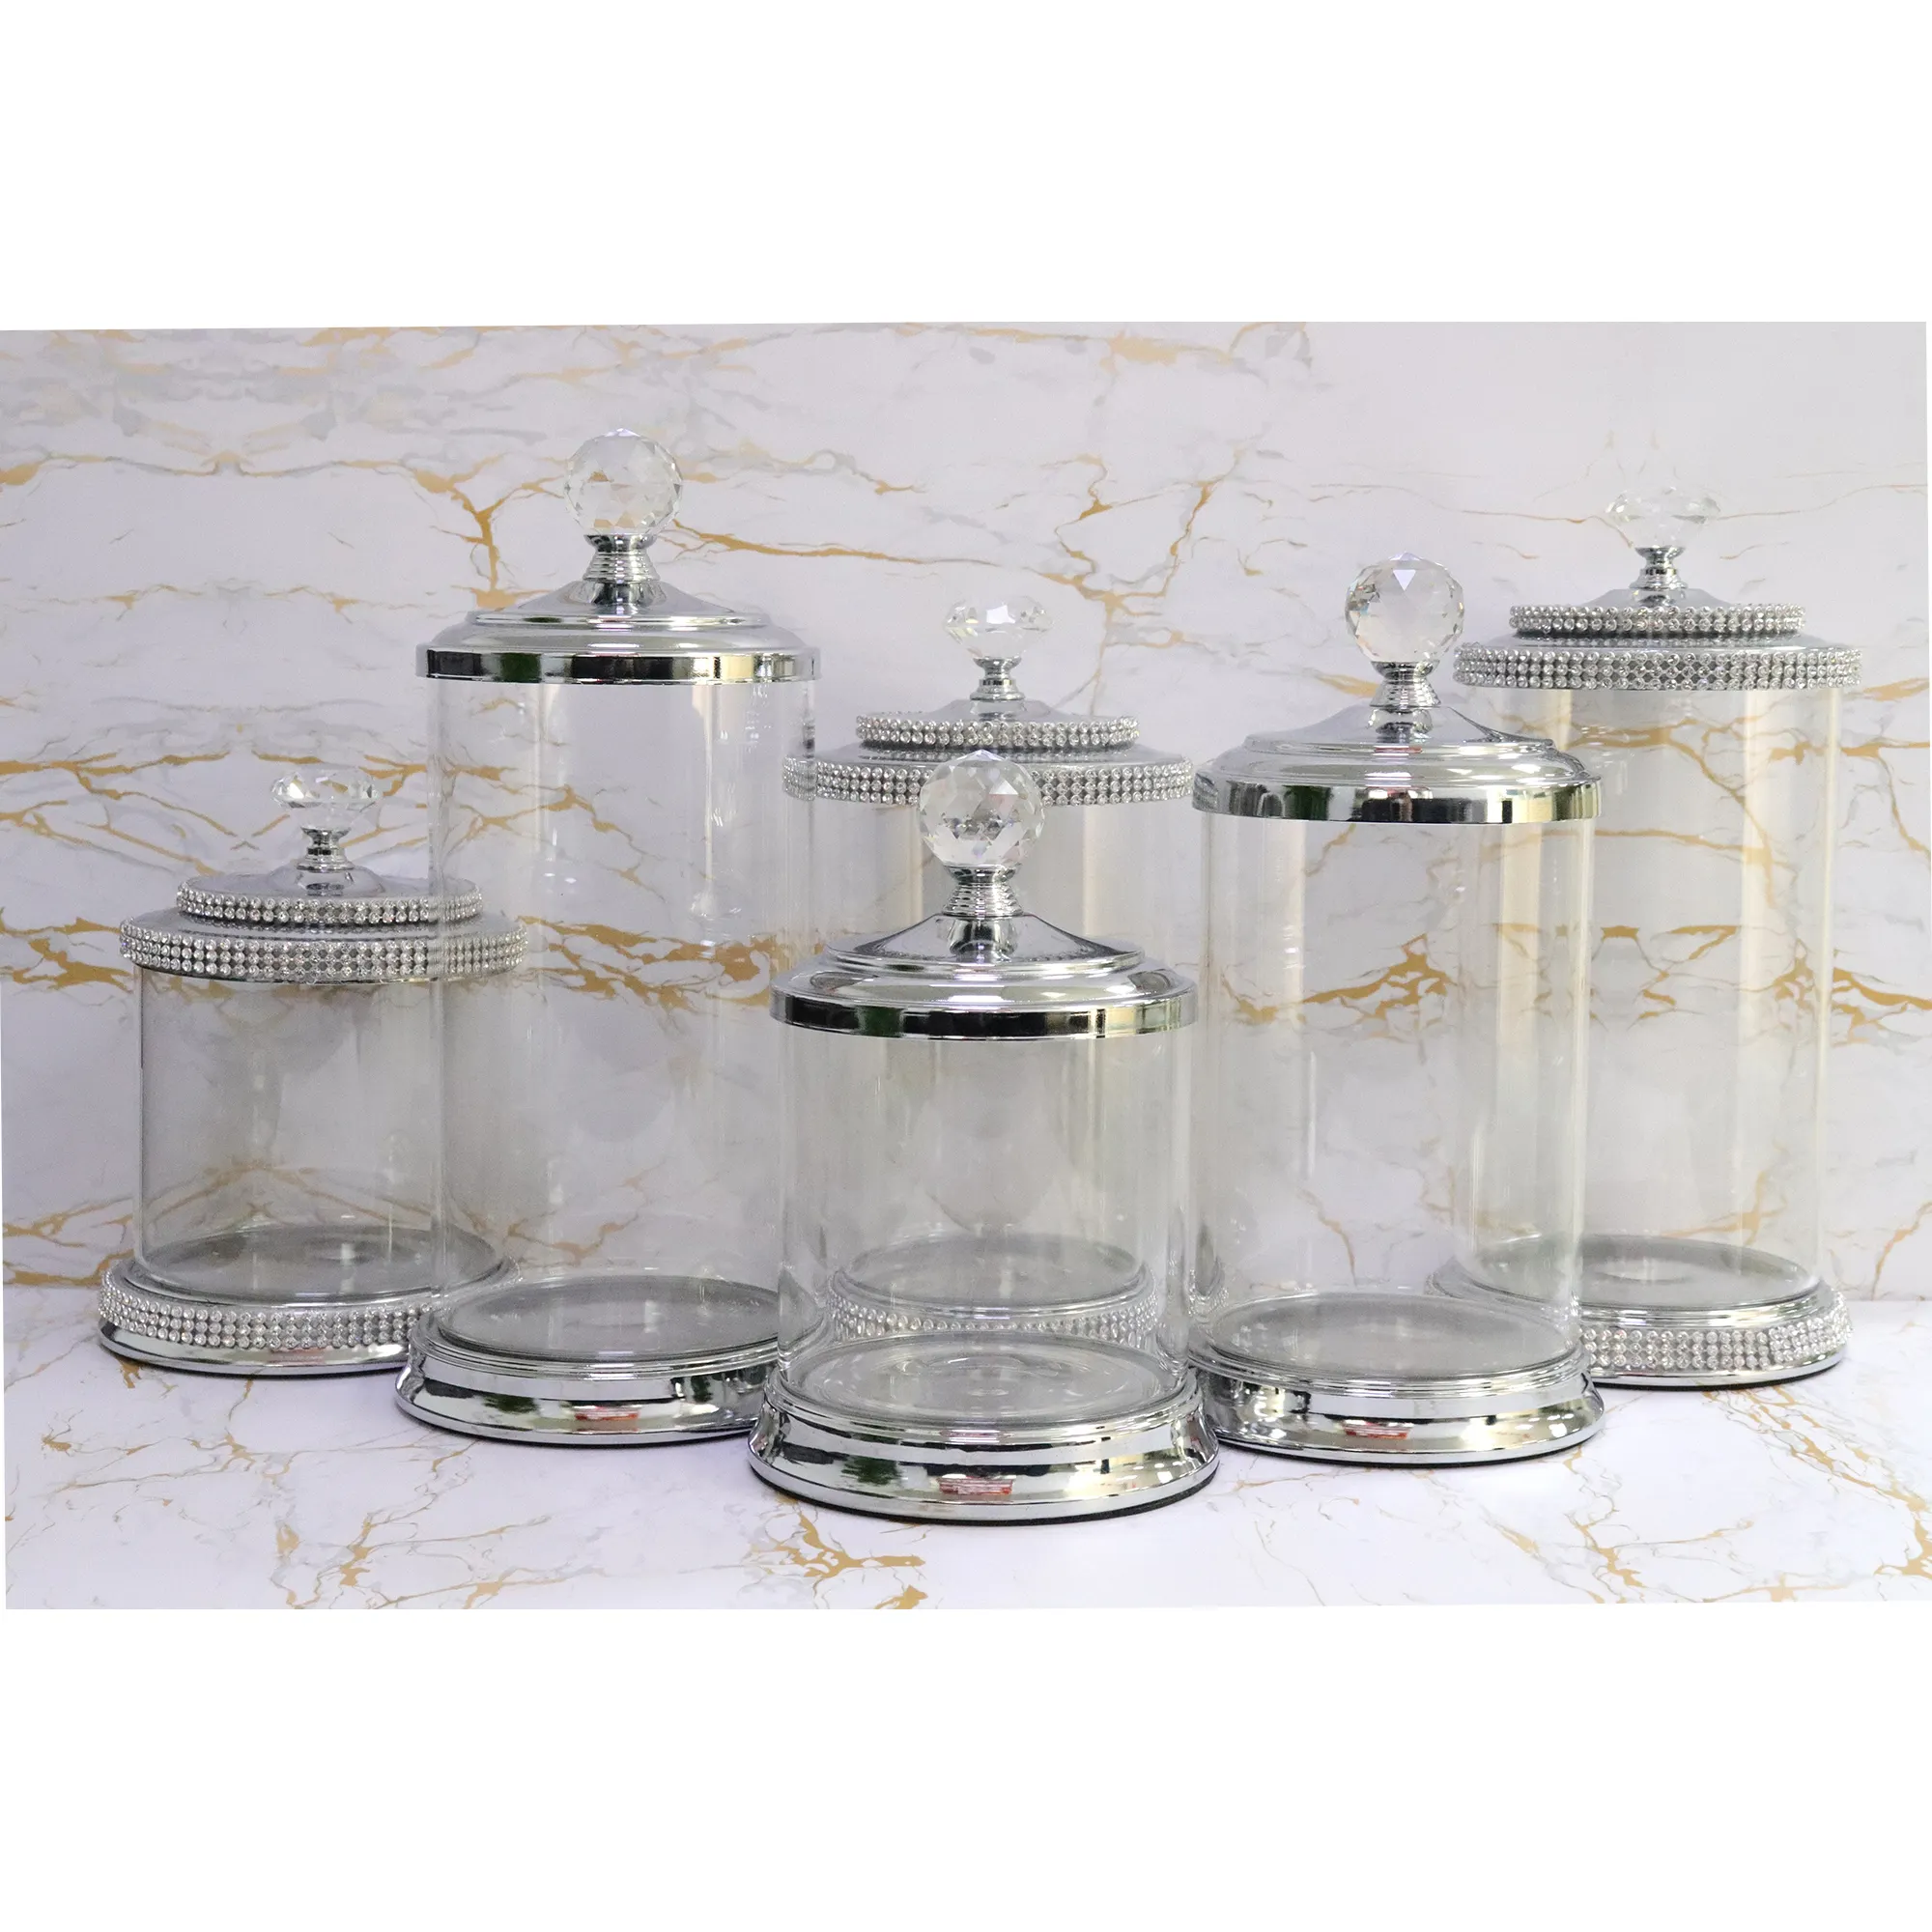 Glass Jar Silver Decor Acrylic Cookie Candy Wholesale Mason Luxury Crystal Storage Bottles Containers Glass Jar With Lid